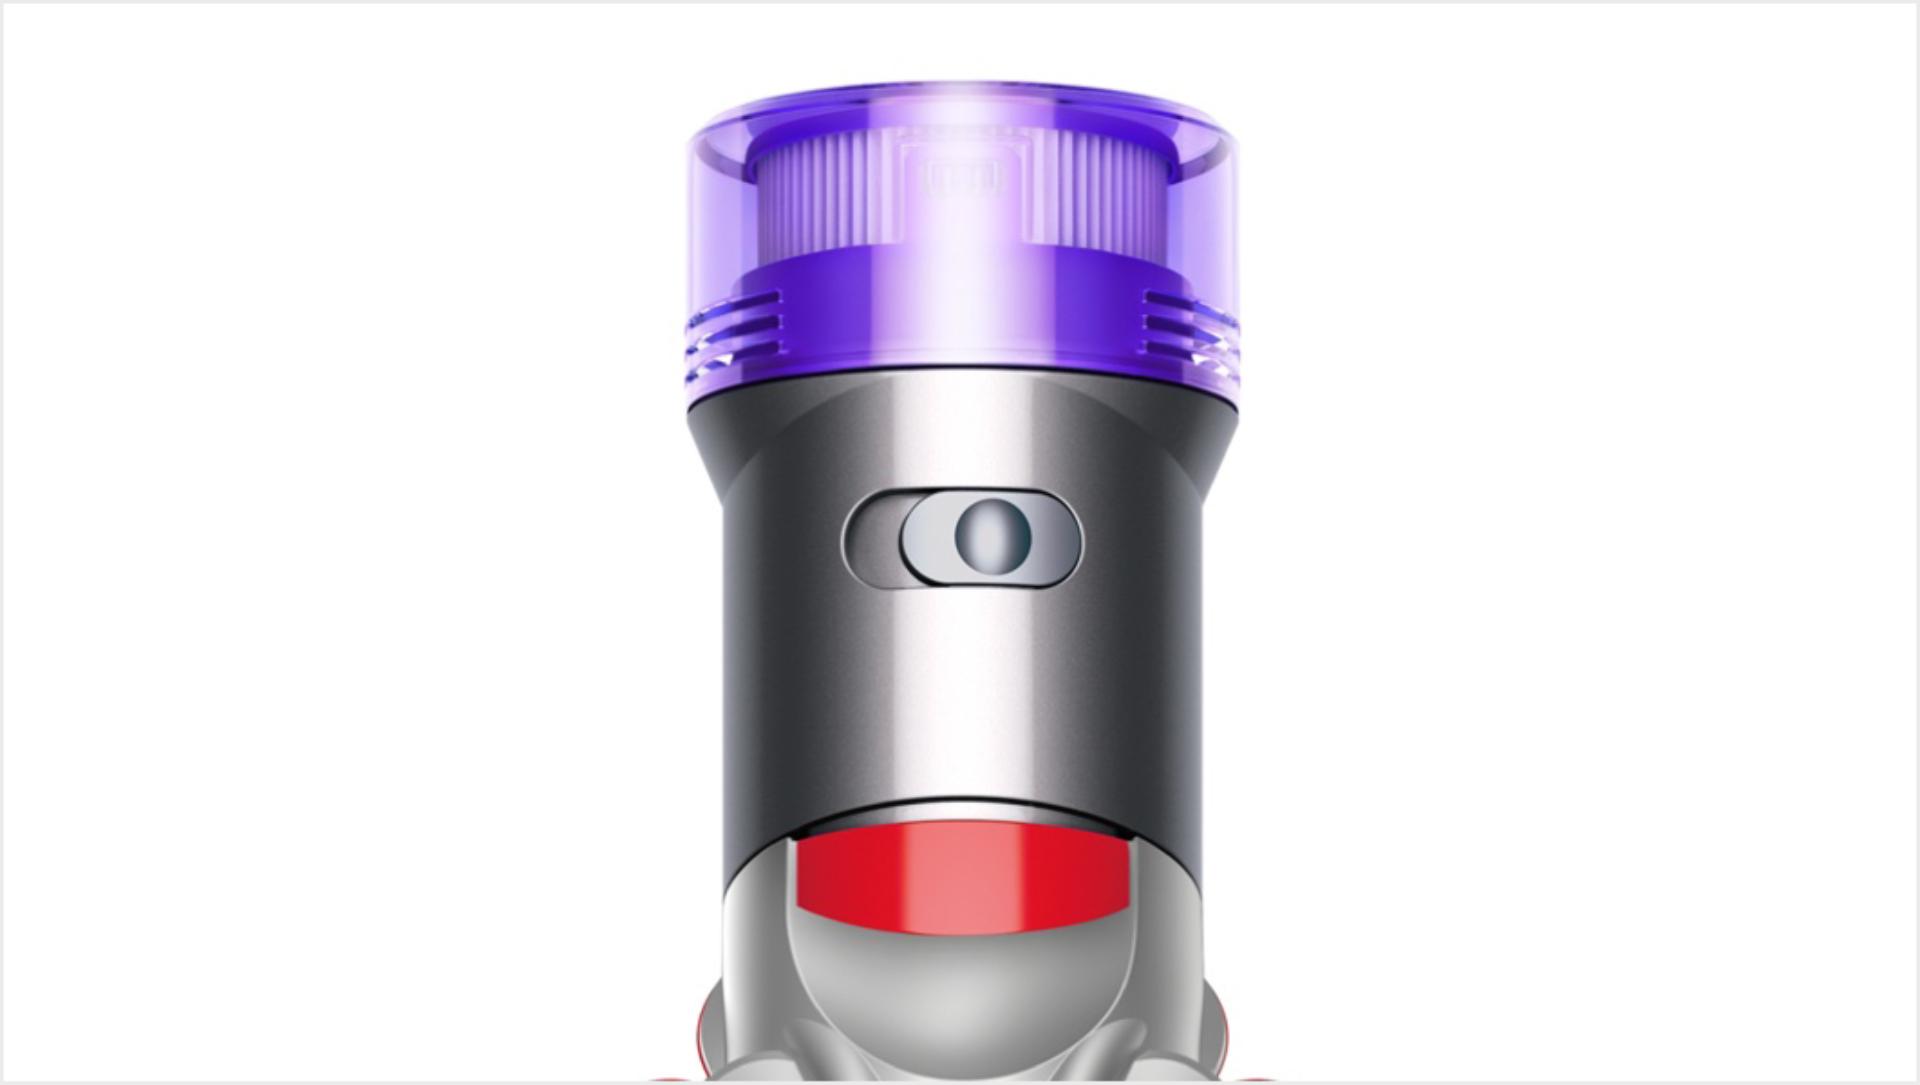 Close-up of Dyson V7 Advanced vacuum's power mode button